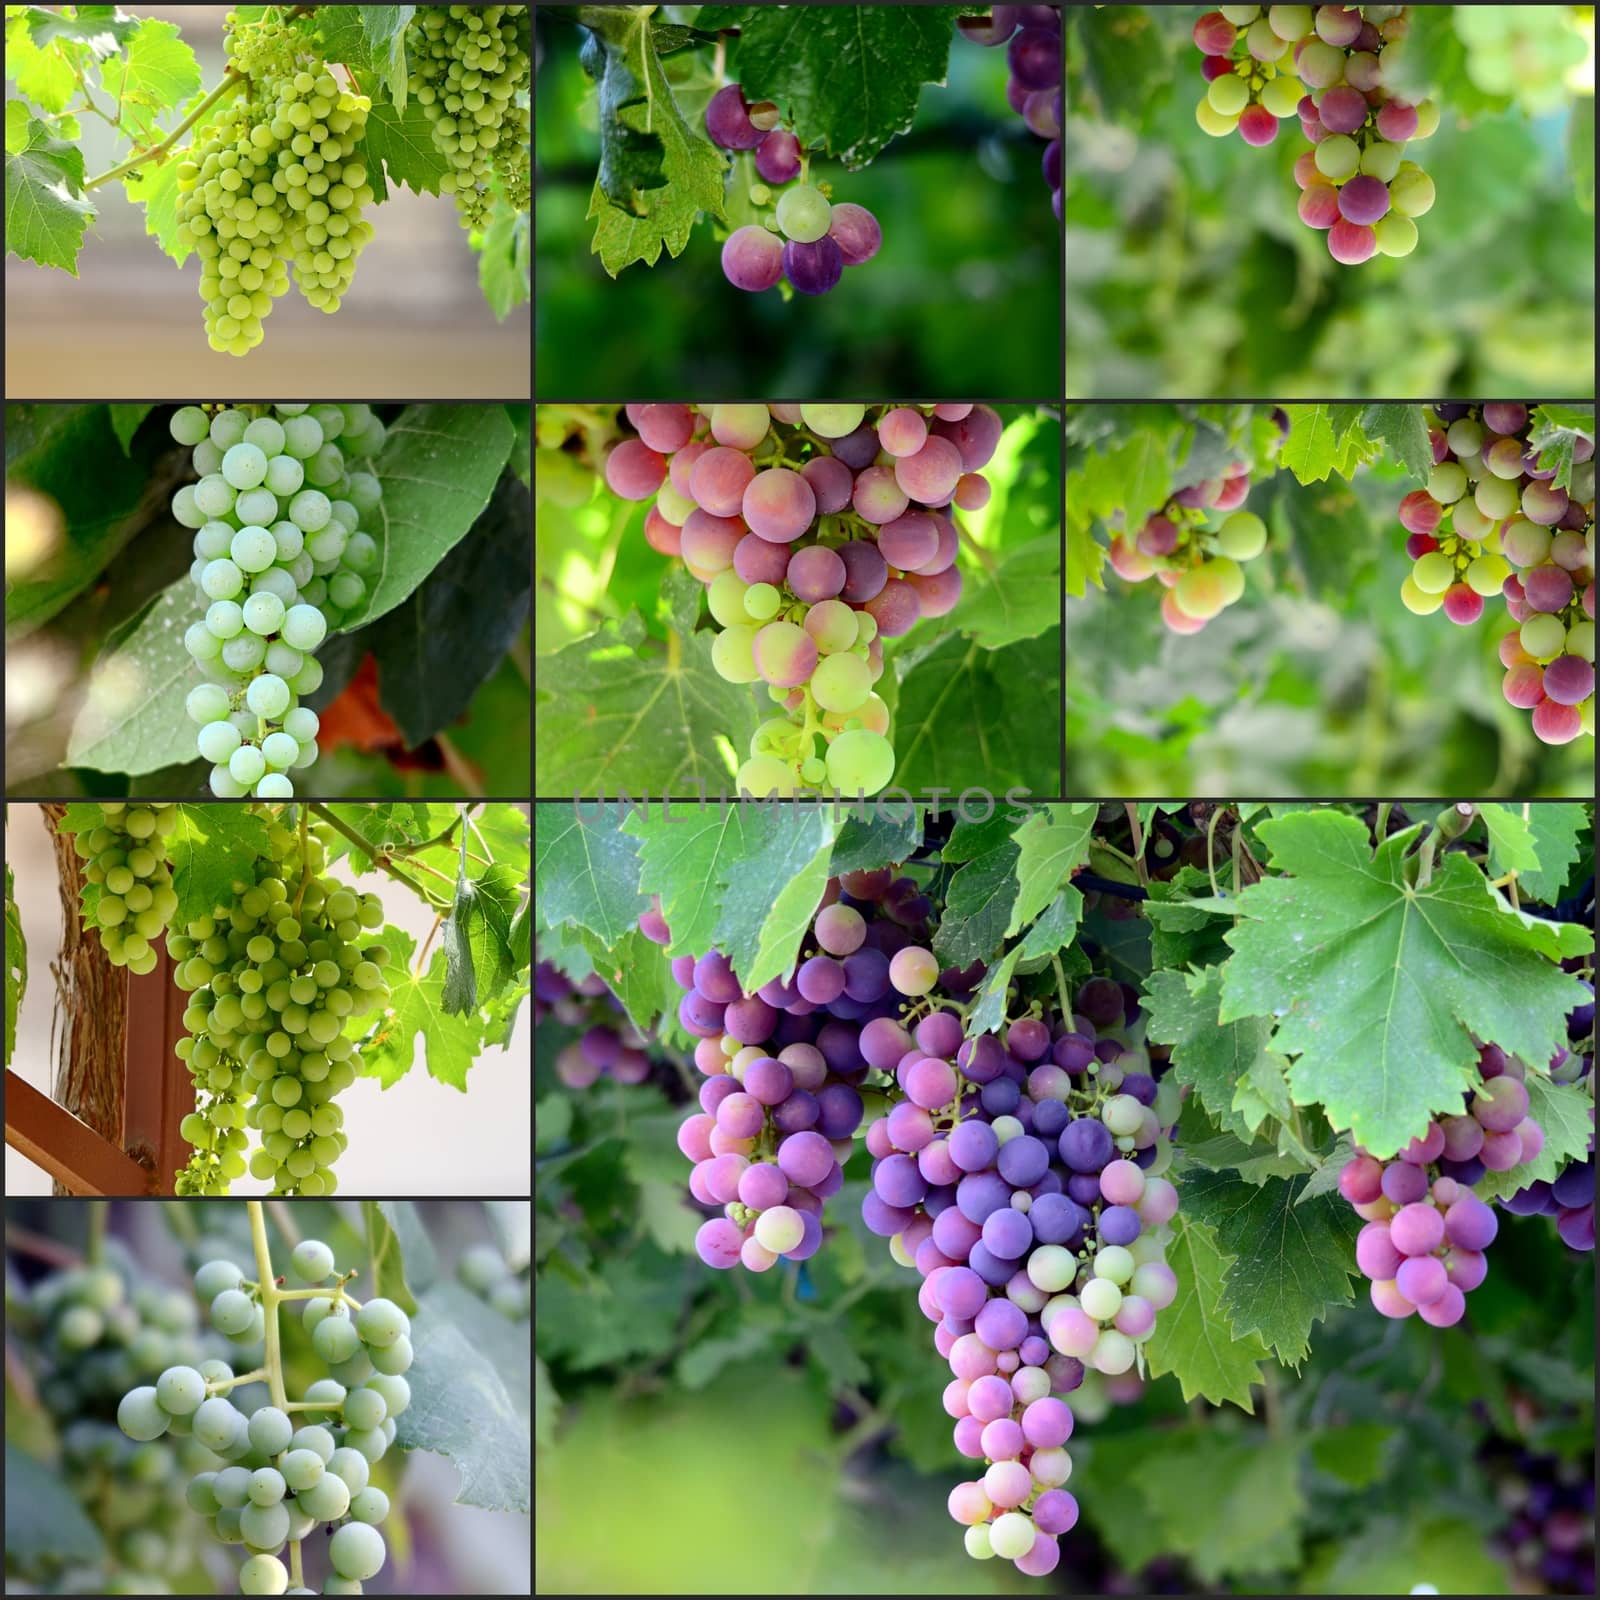  Grapes on the Vine just before harvest by nehru